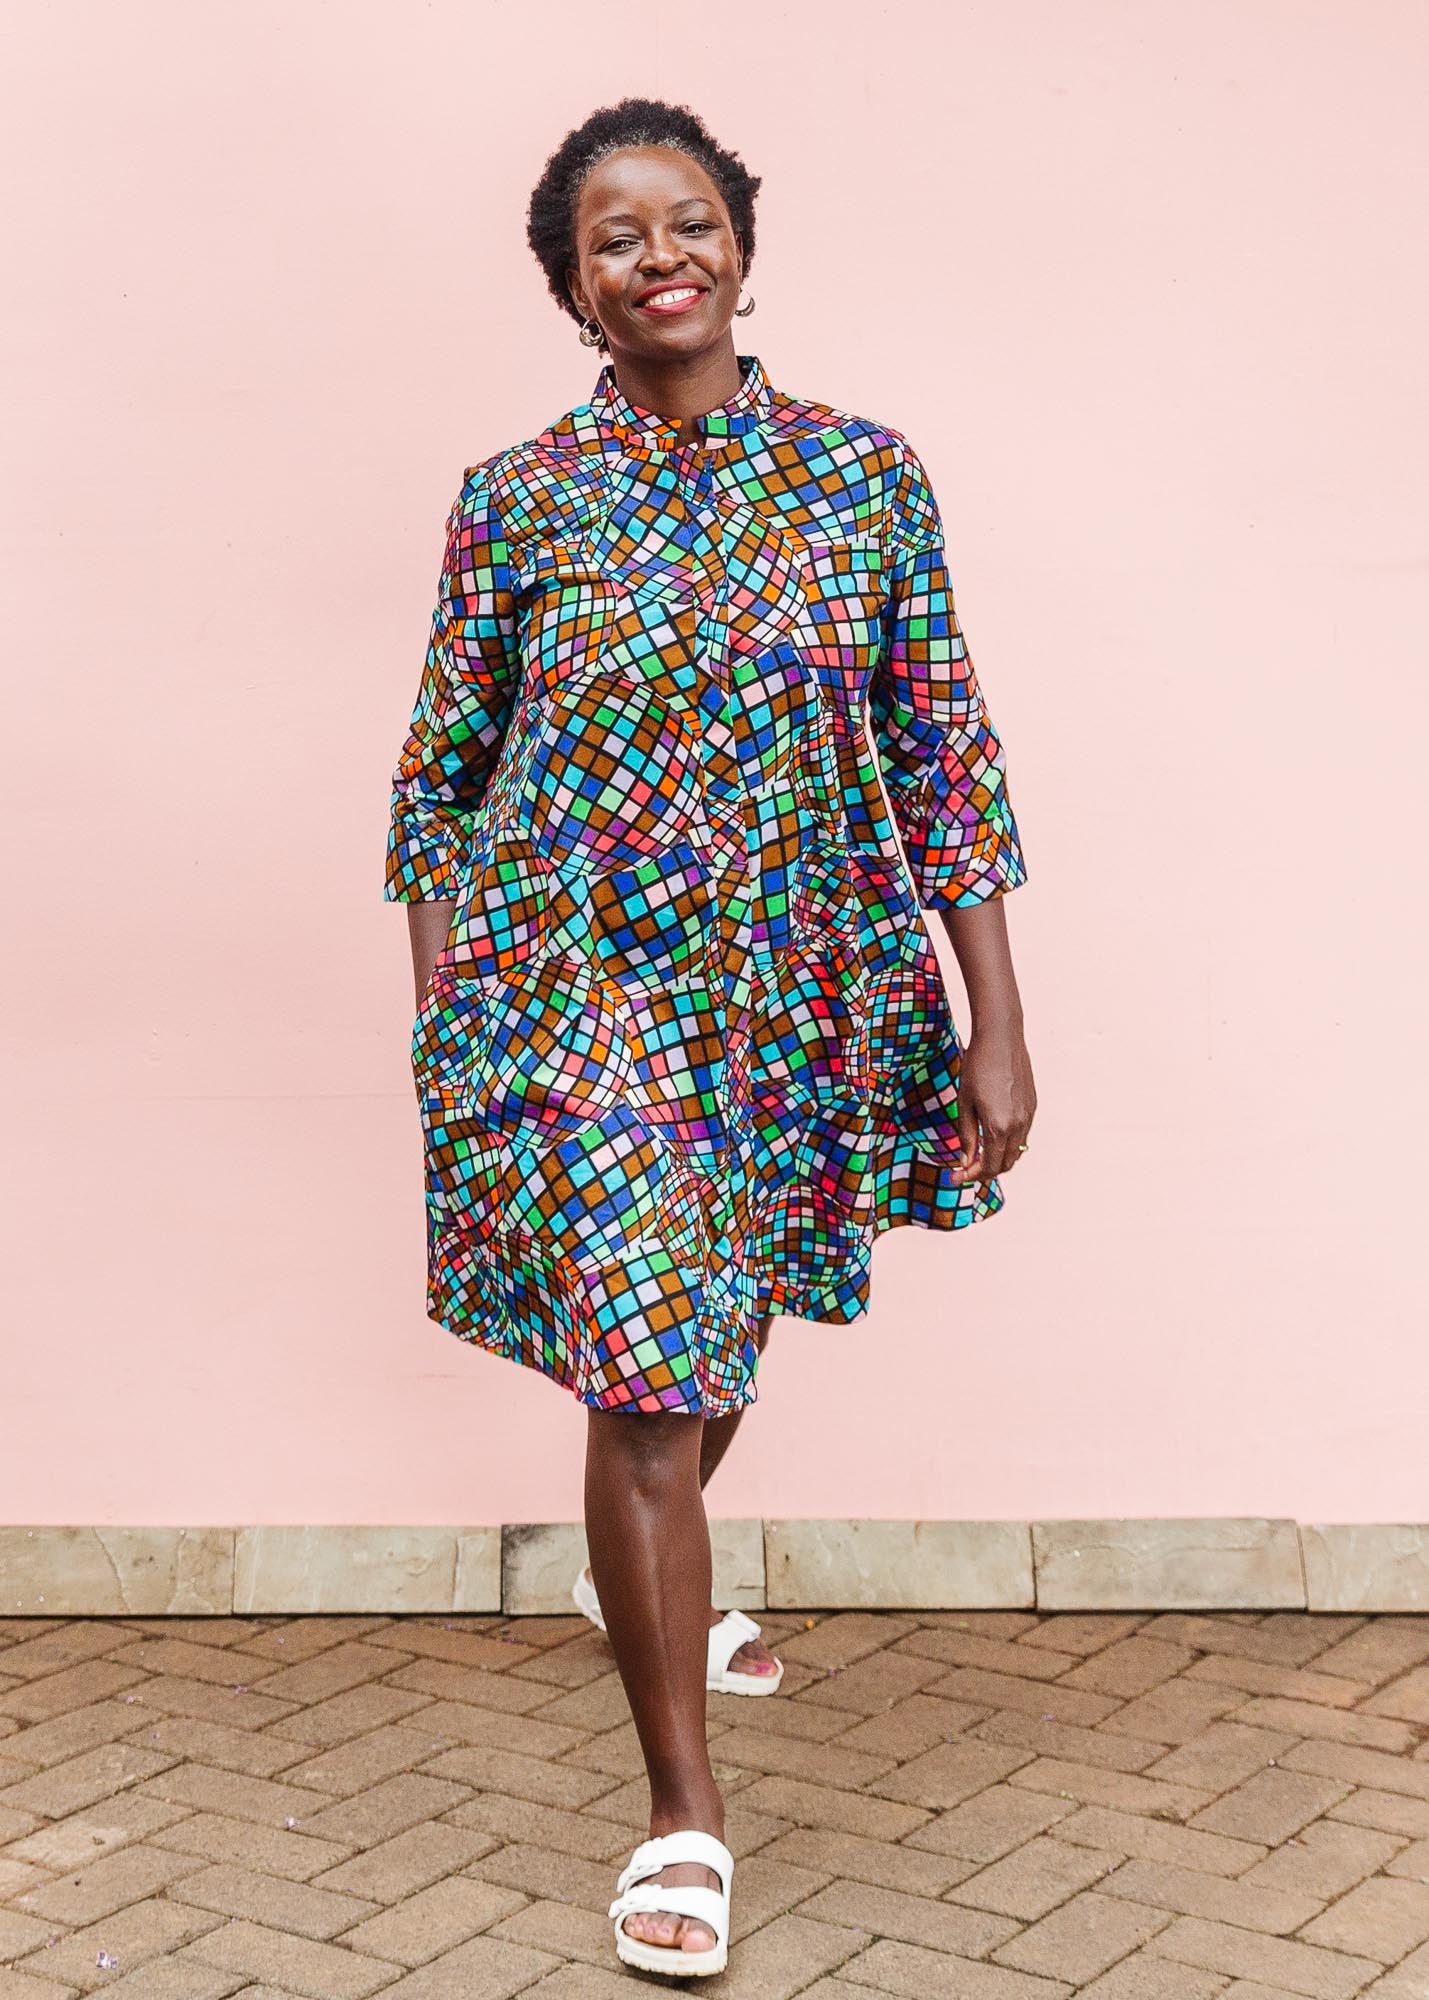 The model is wearing multi colored dress with disco ball print